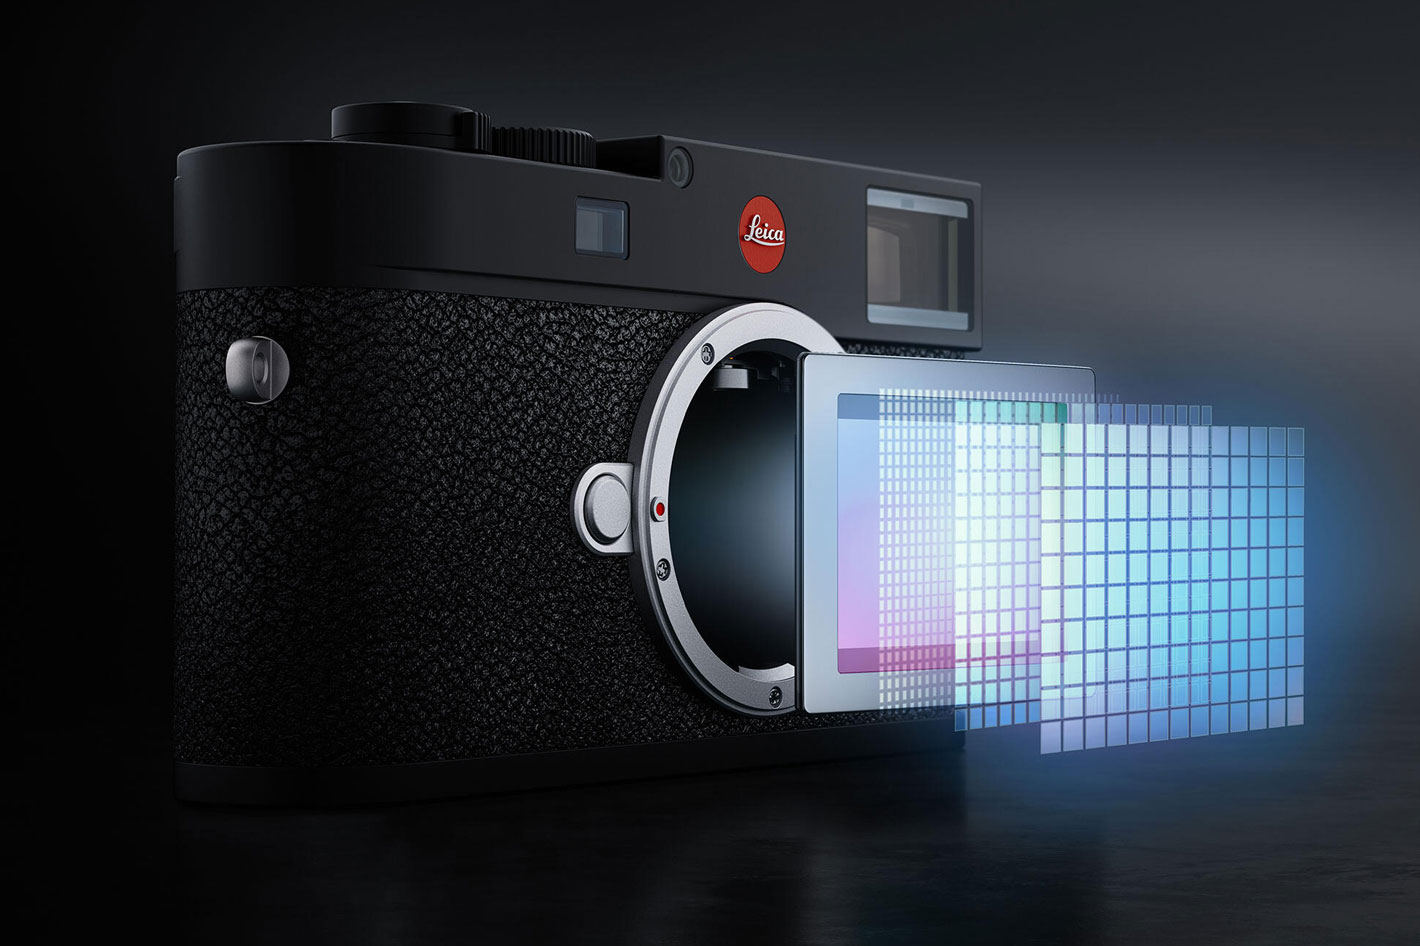 The new Leica M11 with 60, 36 and 18MP: pixel-binning like a smartphone